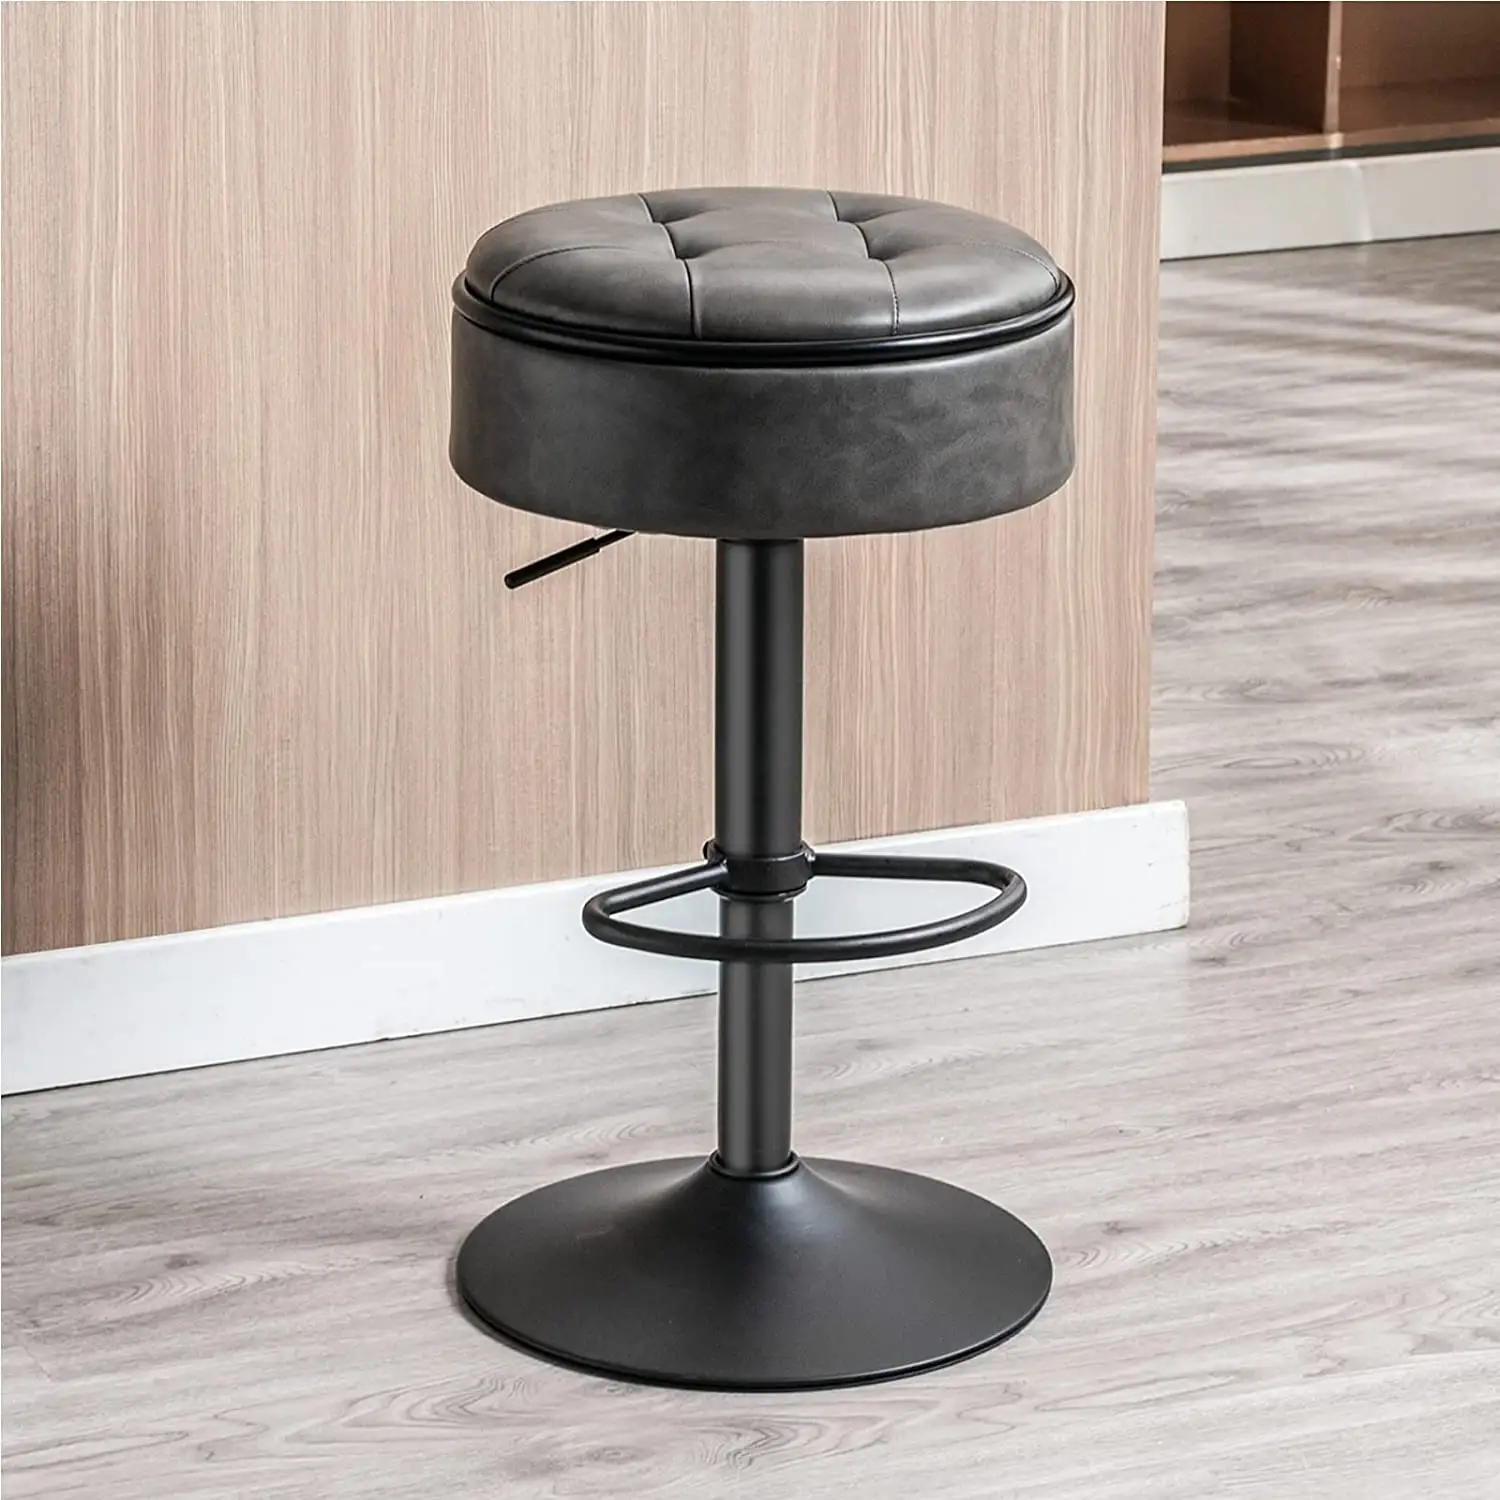 Round Storage Bar Stool, Faux Leather Metal Iron Bar Chair Modern Kitchen Chair Commercial Furniture Nordic Bar Chair Beige